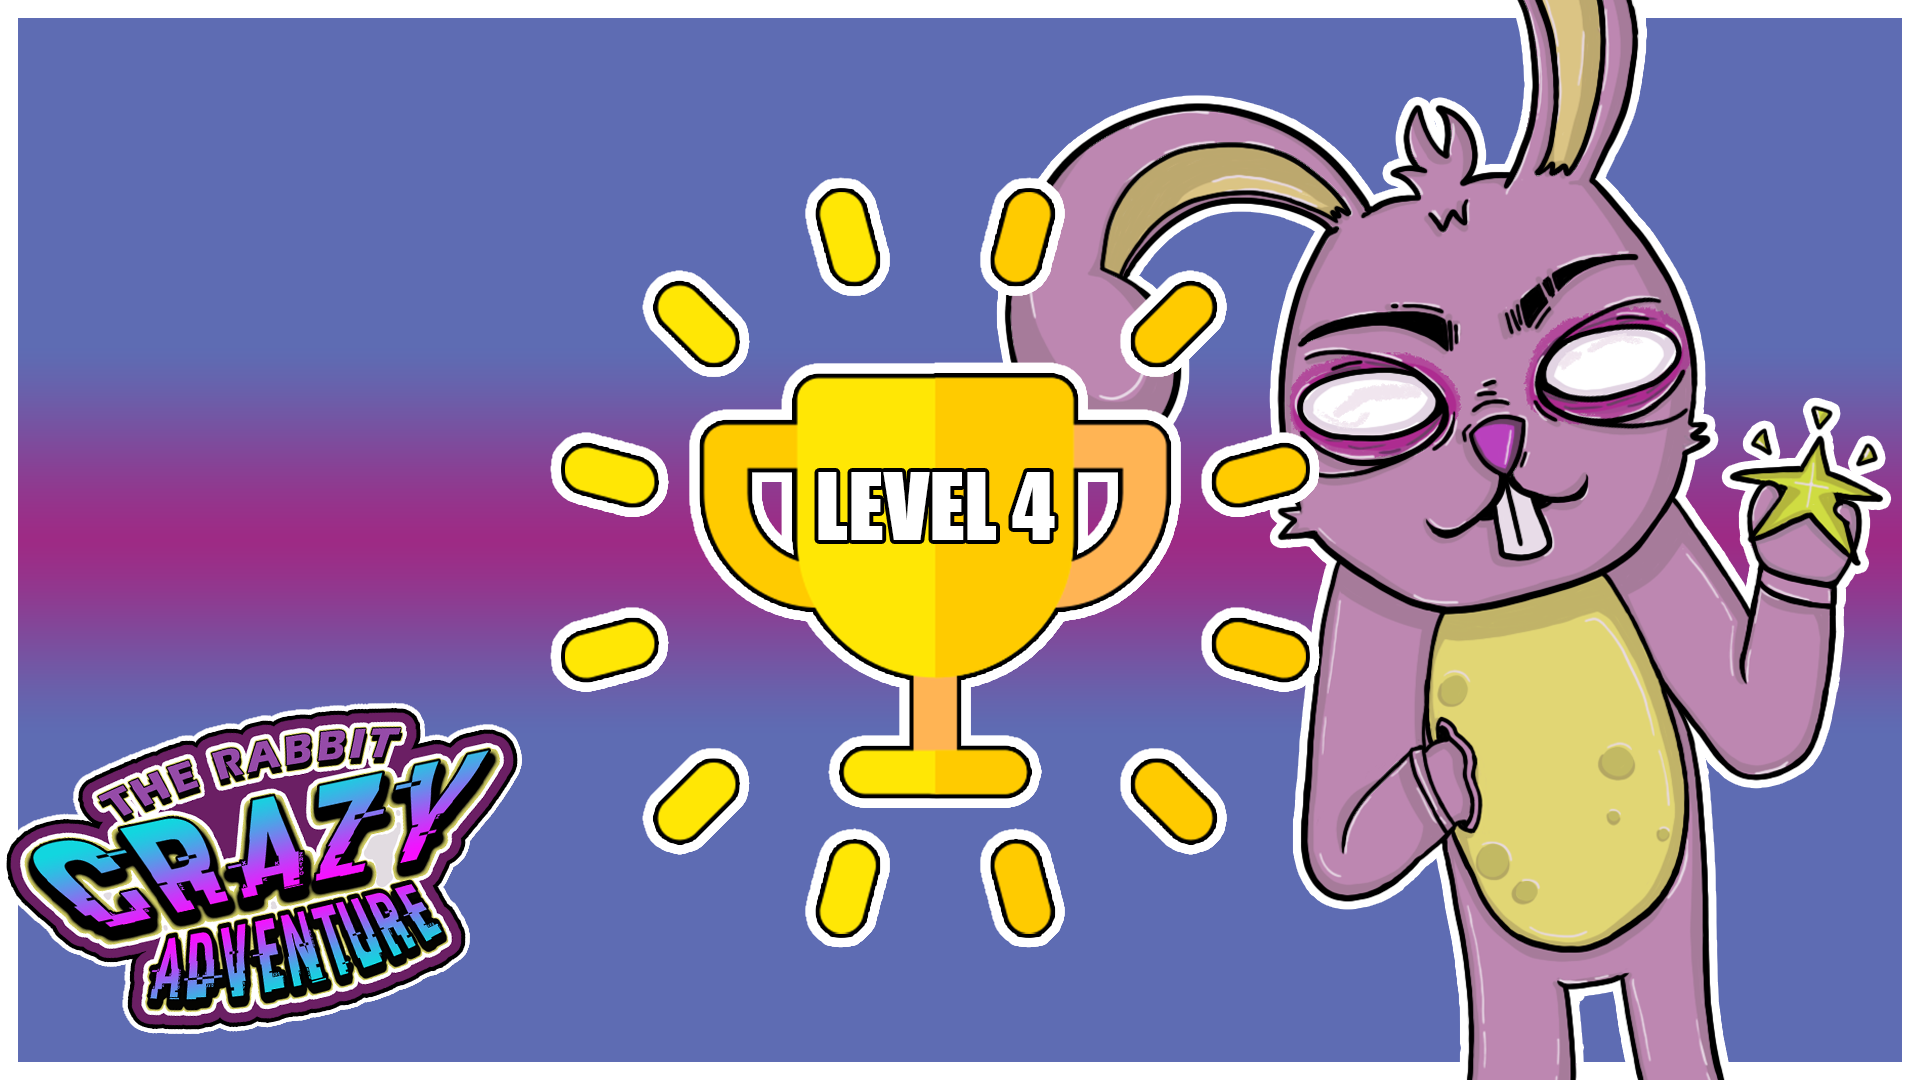 Icon for LEVEL 4